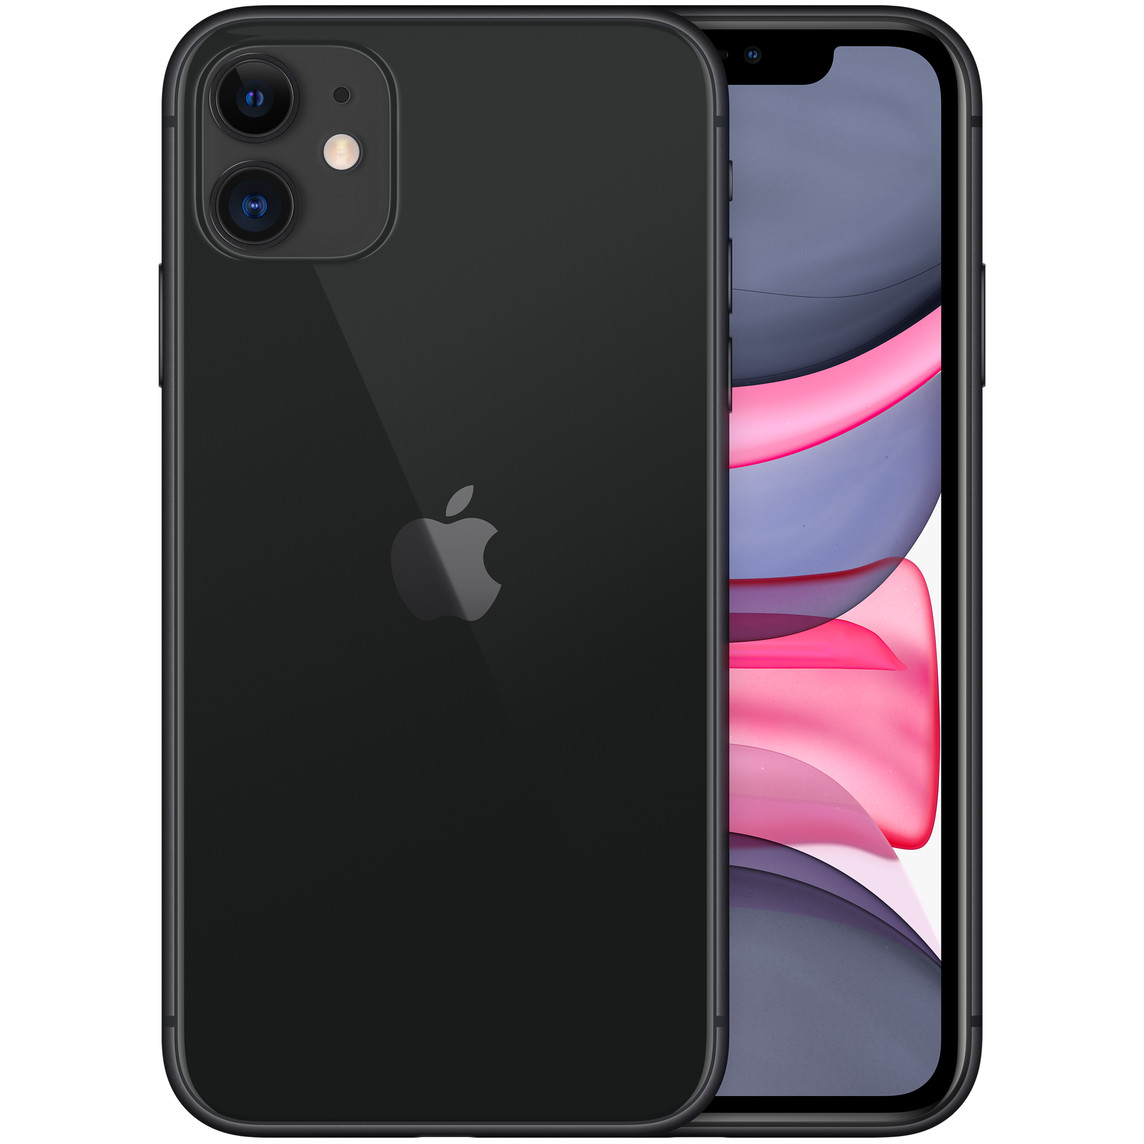 Apple iPhone 11 (128GB) - Refreshed Device